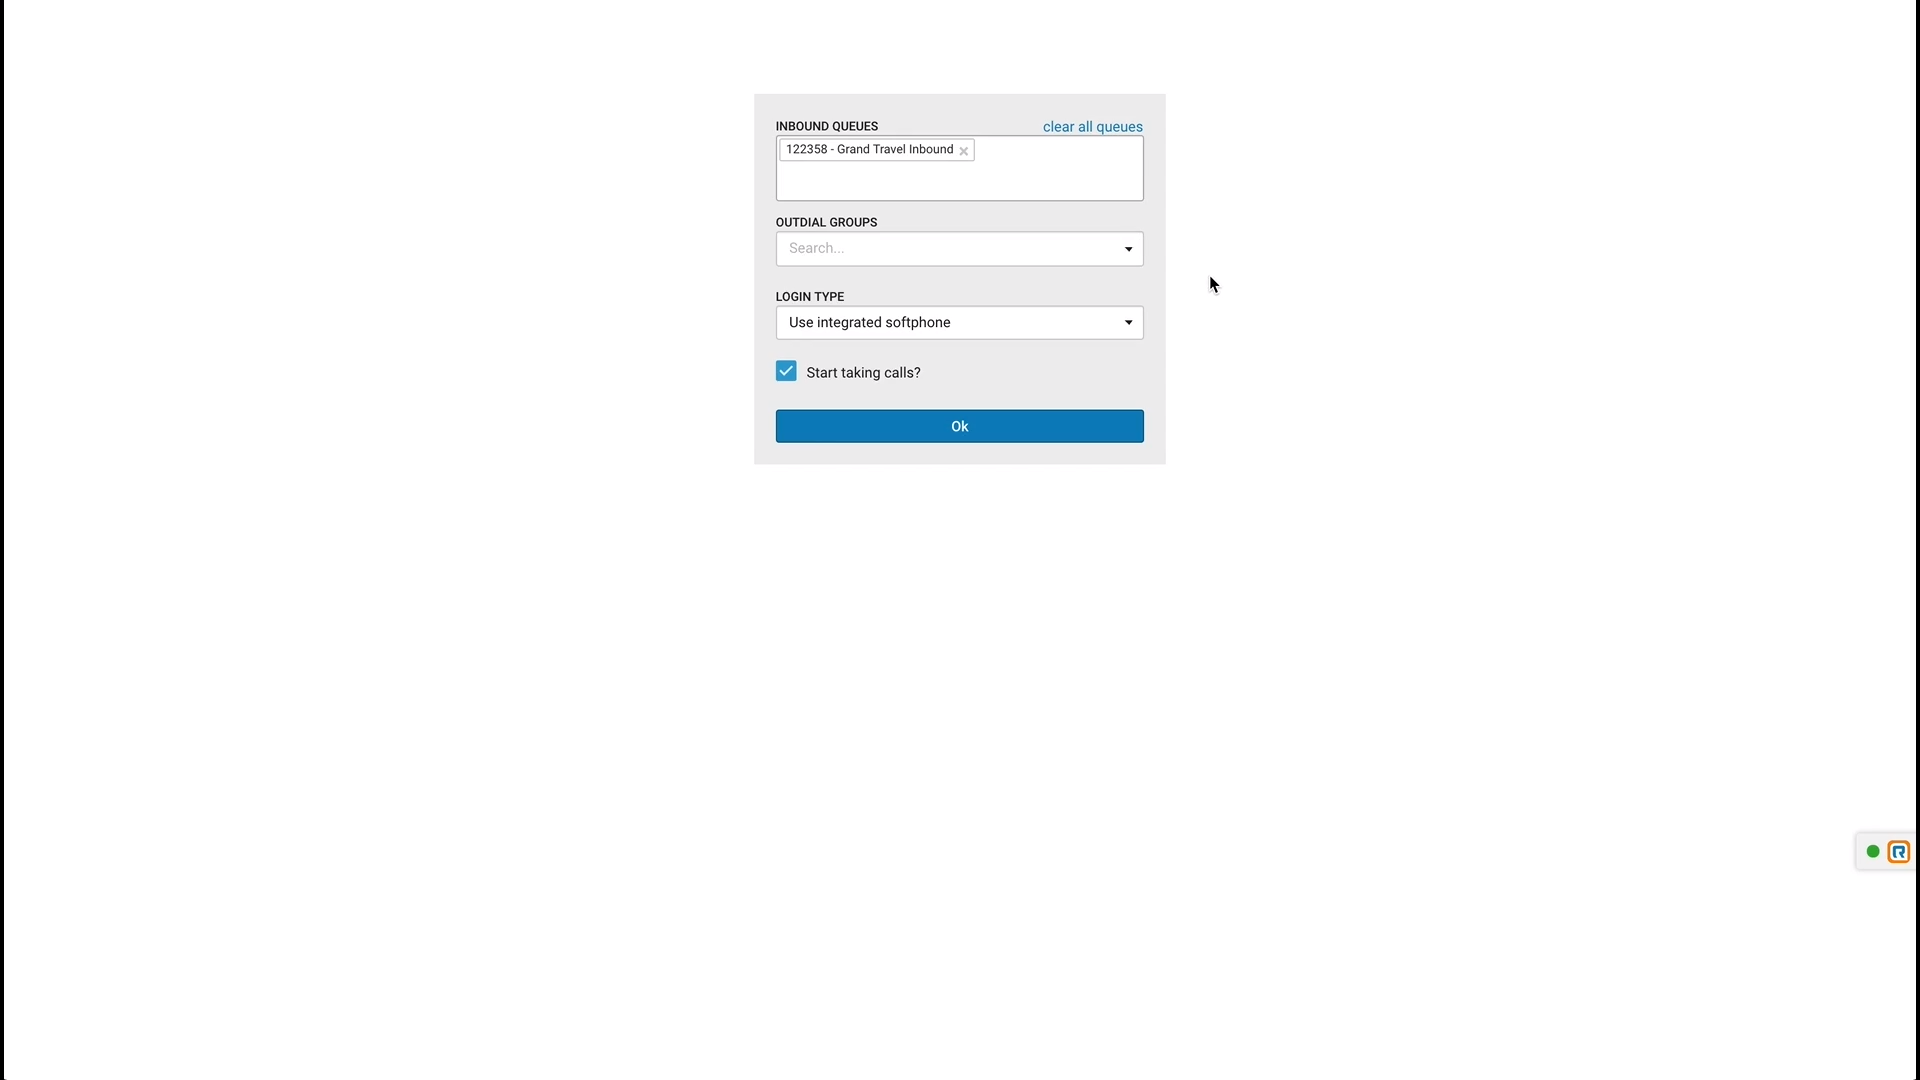 RingCentral Engage Voice inbound queues screenshot